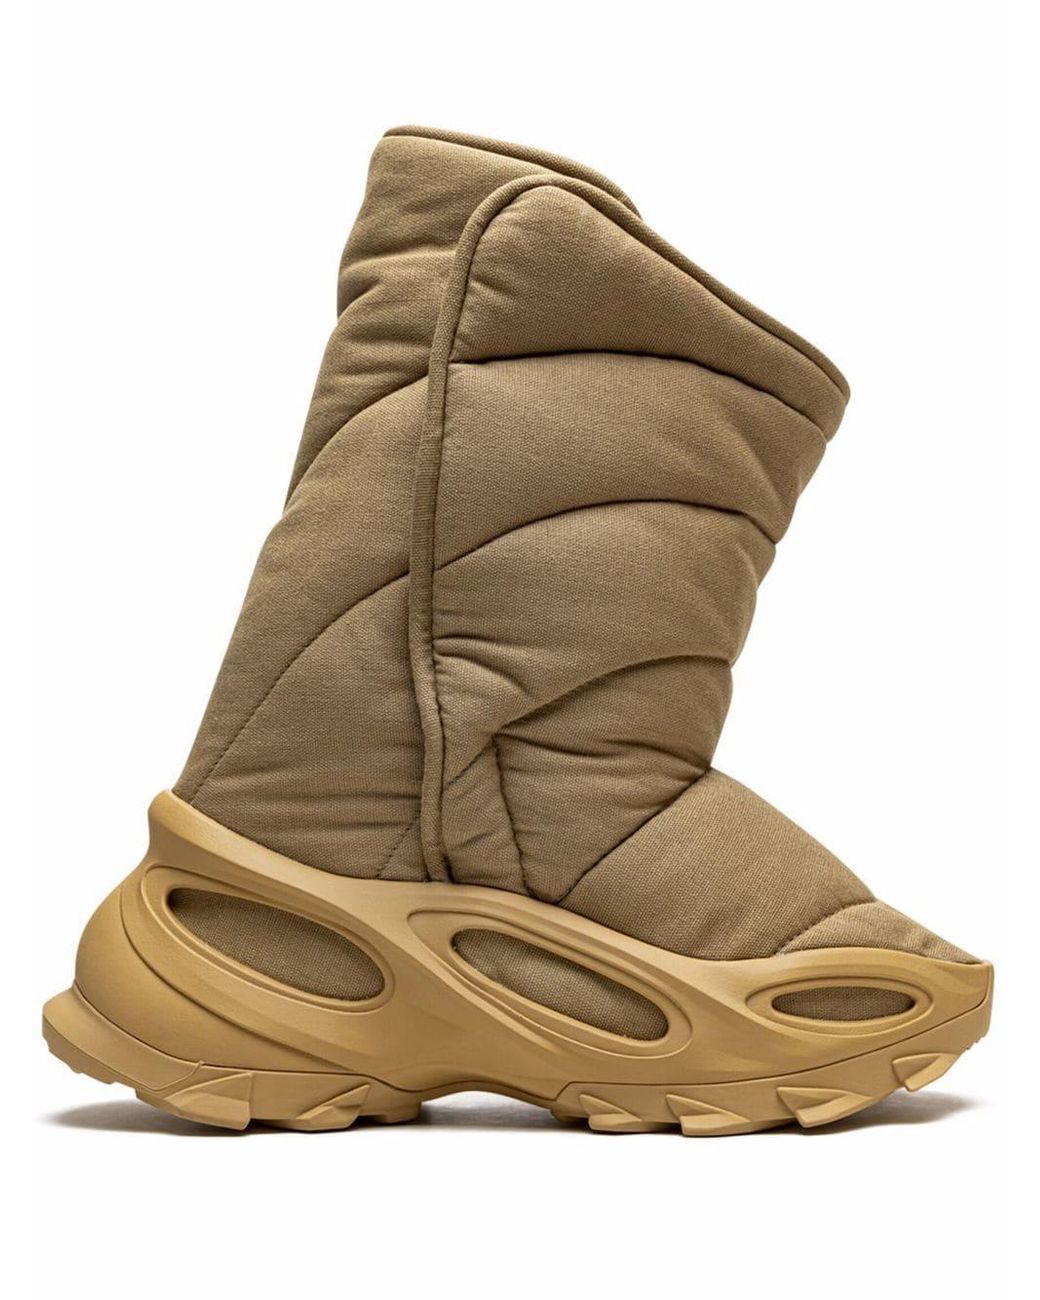 Yeezy Yeezy Insulated Boots for Men | Lyst